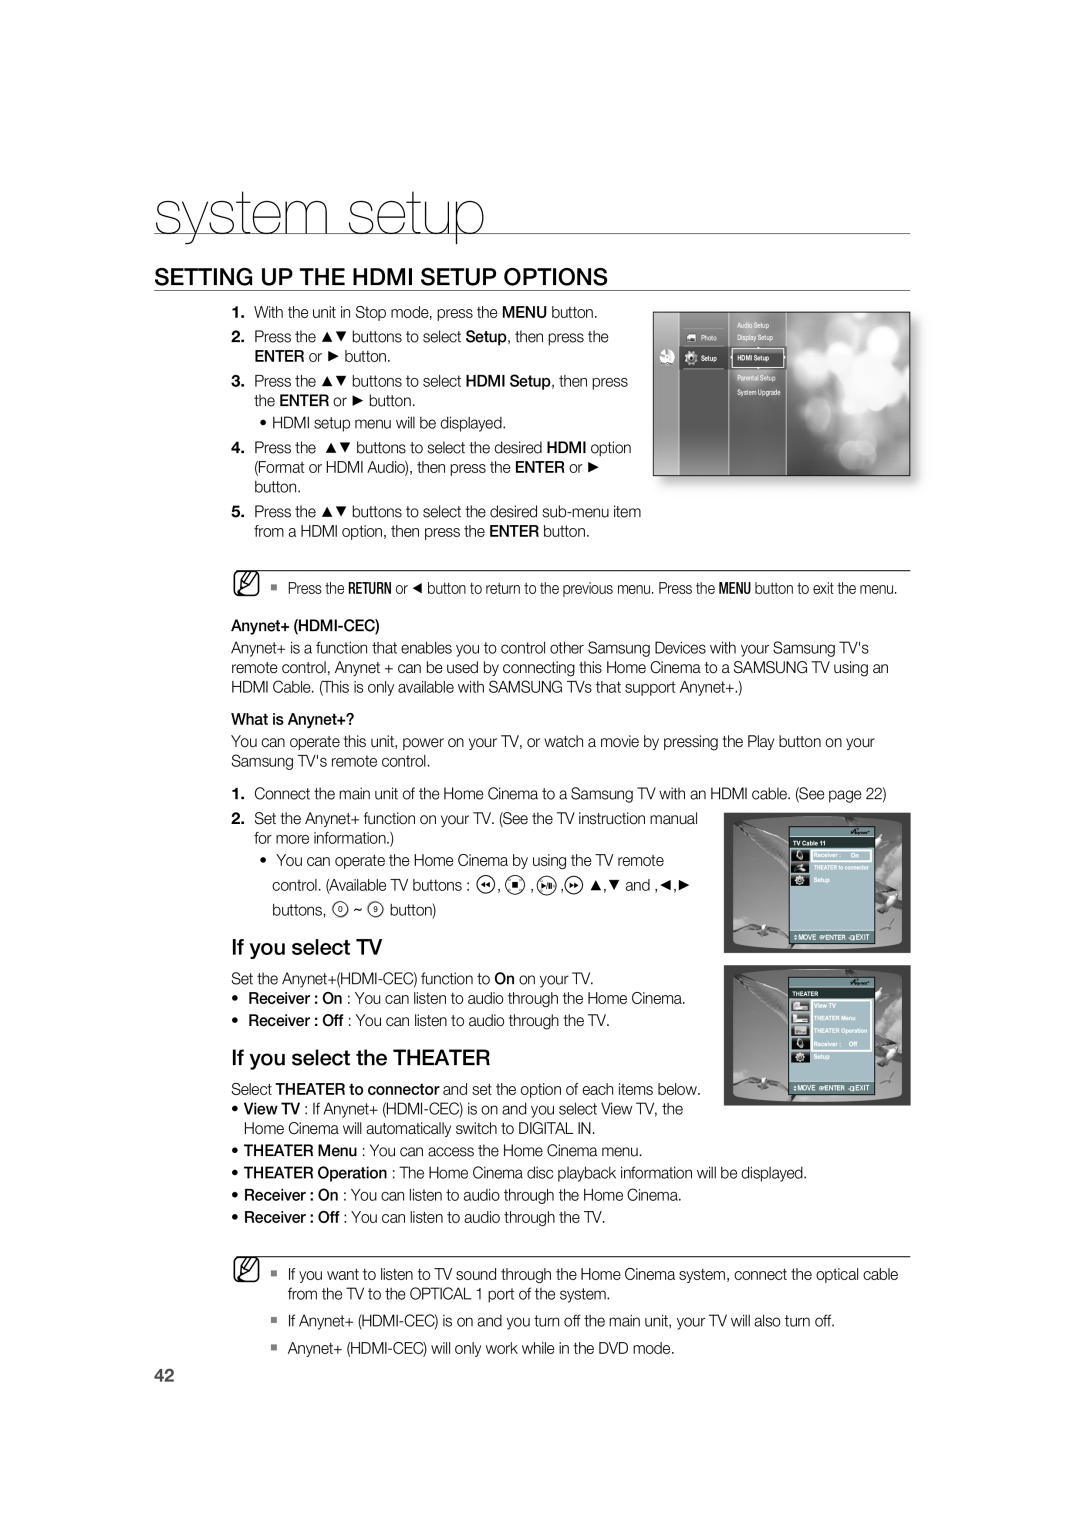 Samsung AH68-02019K manual Setting Up The Hdmi Setup Options, If you select TV, If you select the THEATER, system setup 